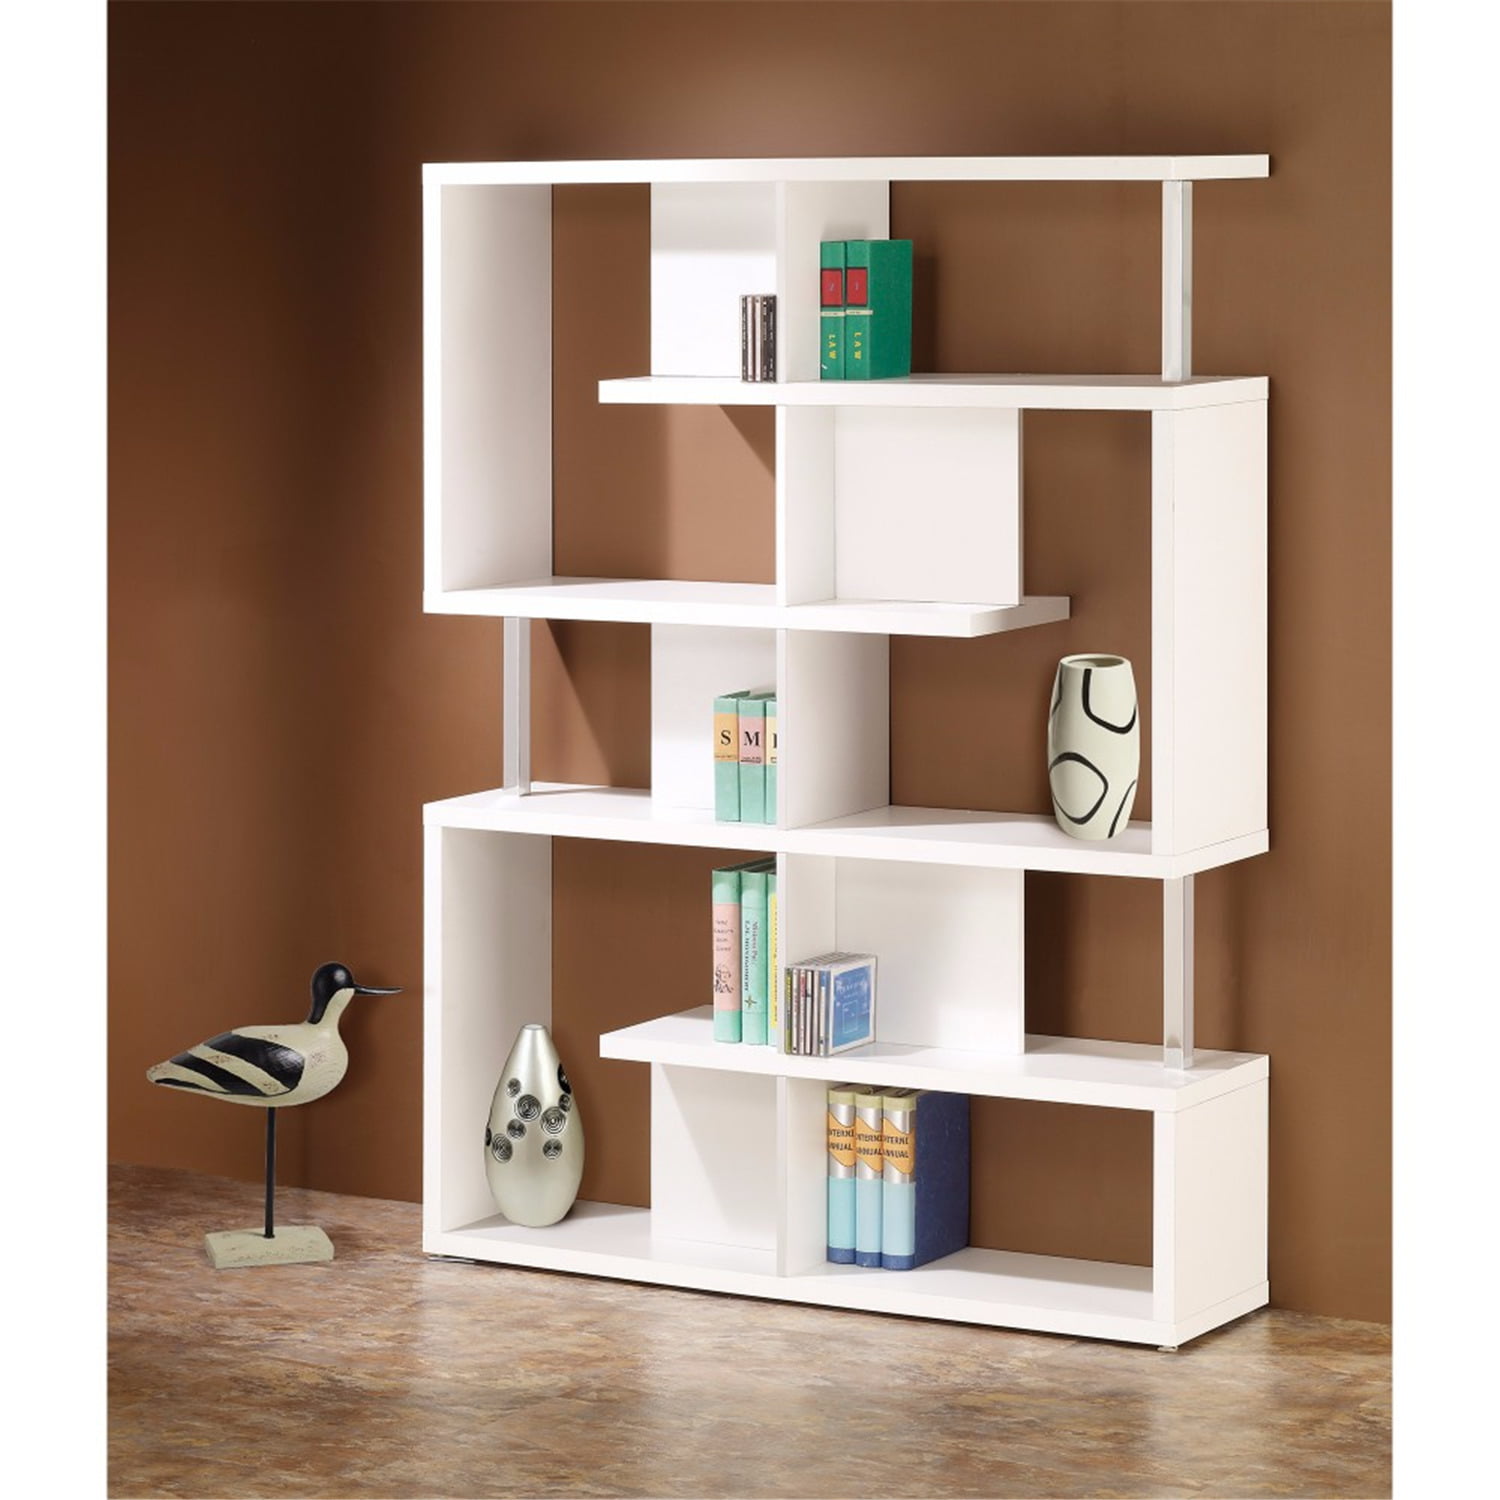 Picture of Benzara BM156246 63.25 x 47.25 x 11.5 in. Splendid White Bookcase with Chrome Support Beams